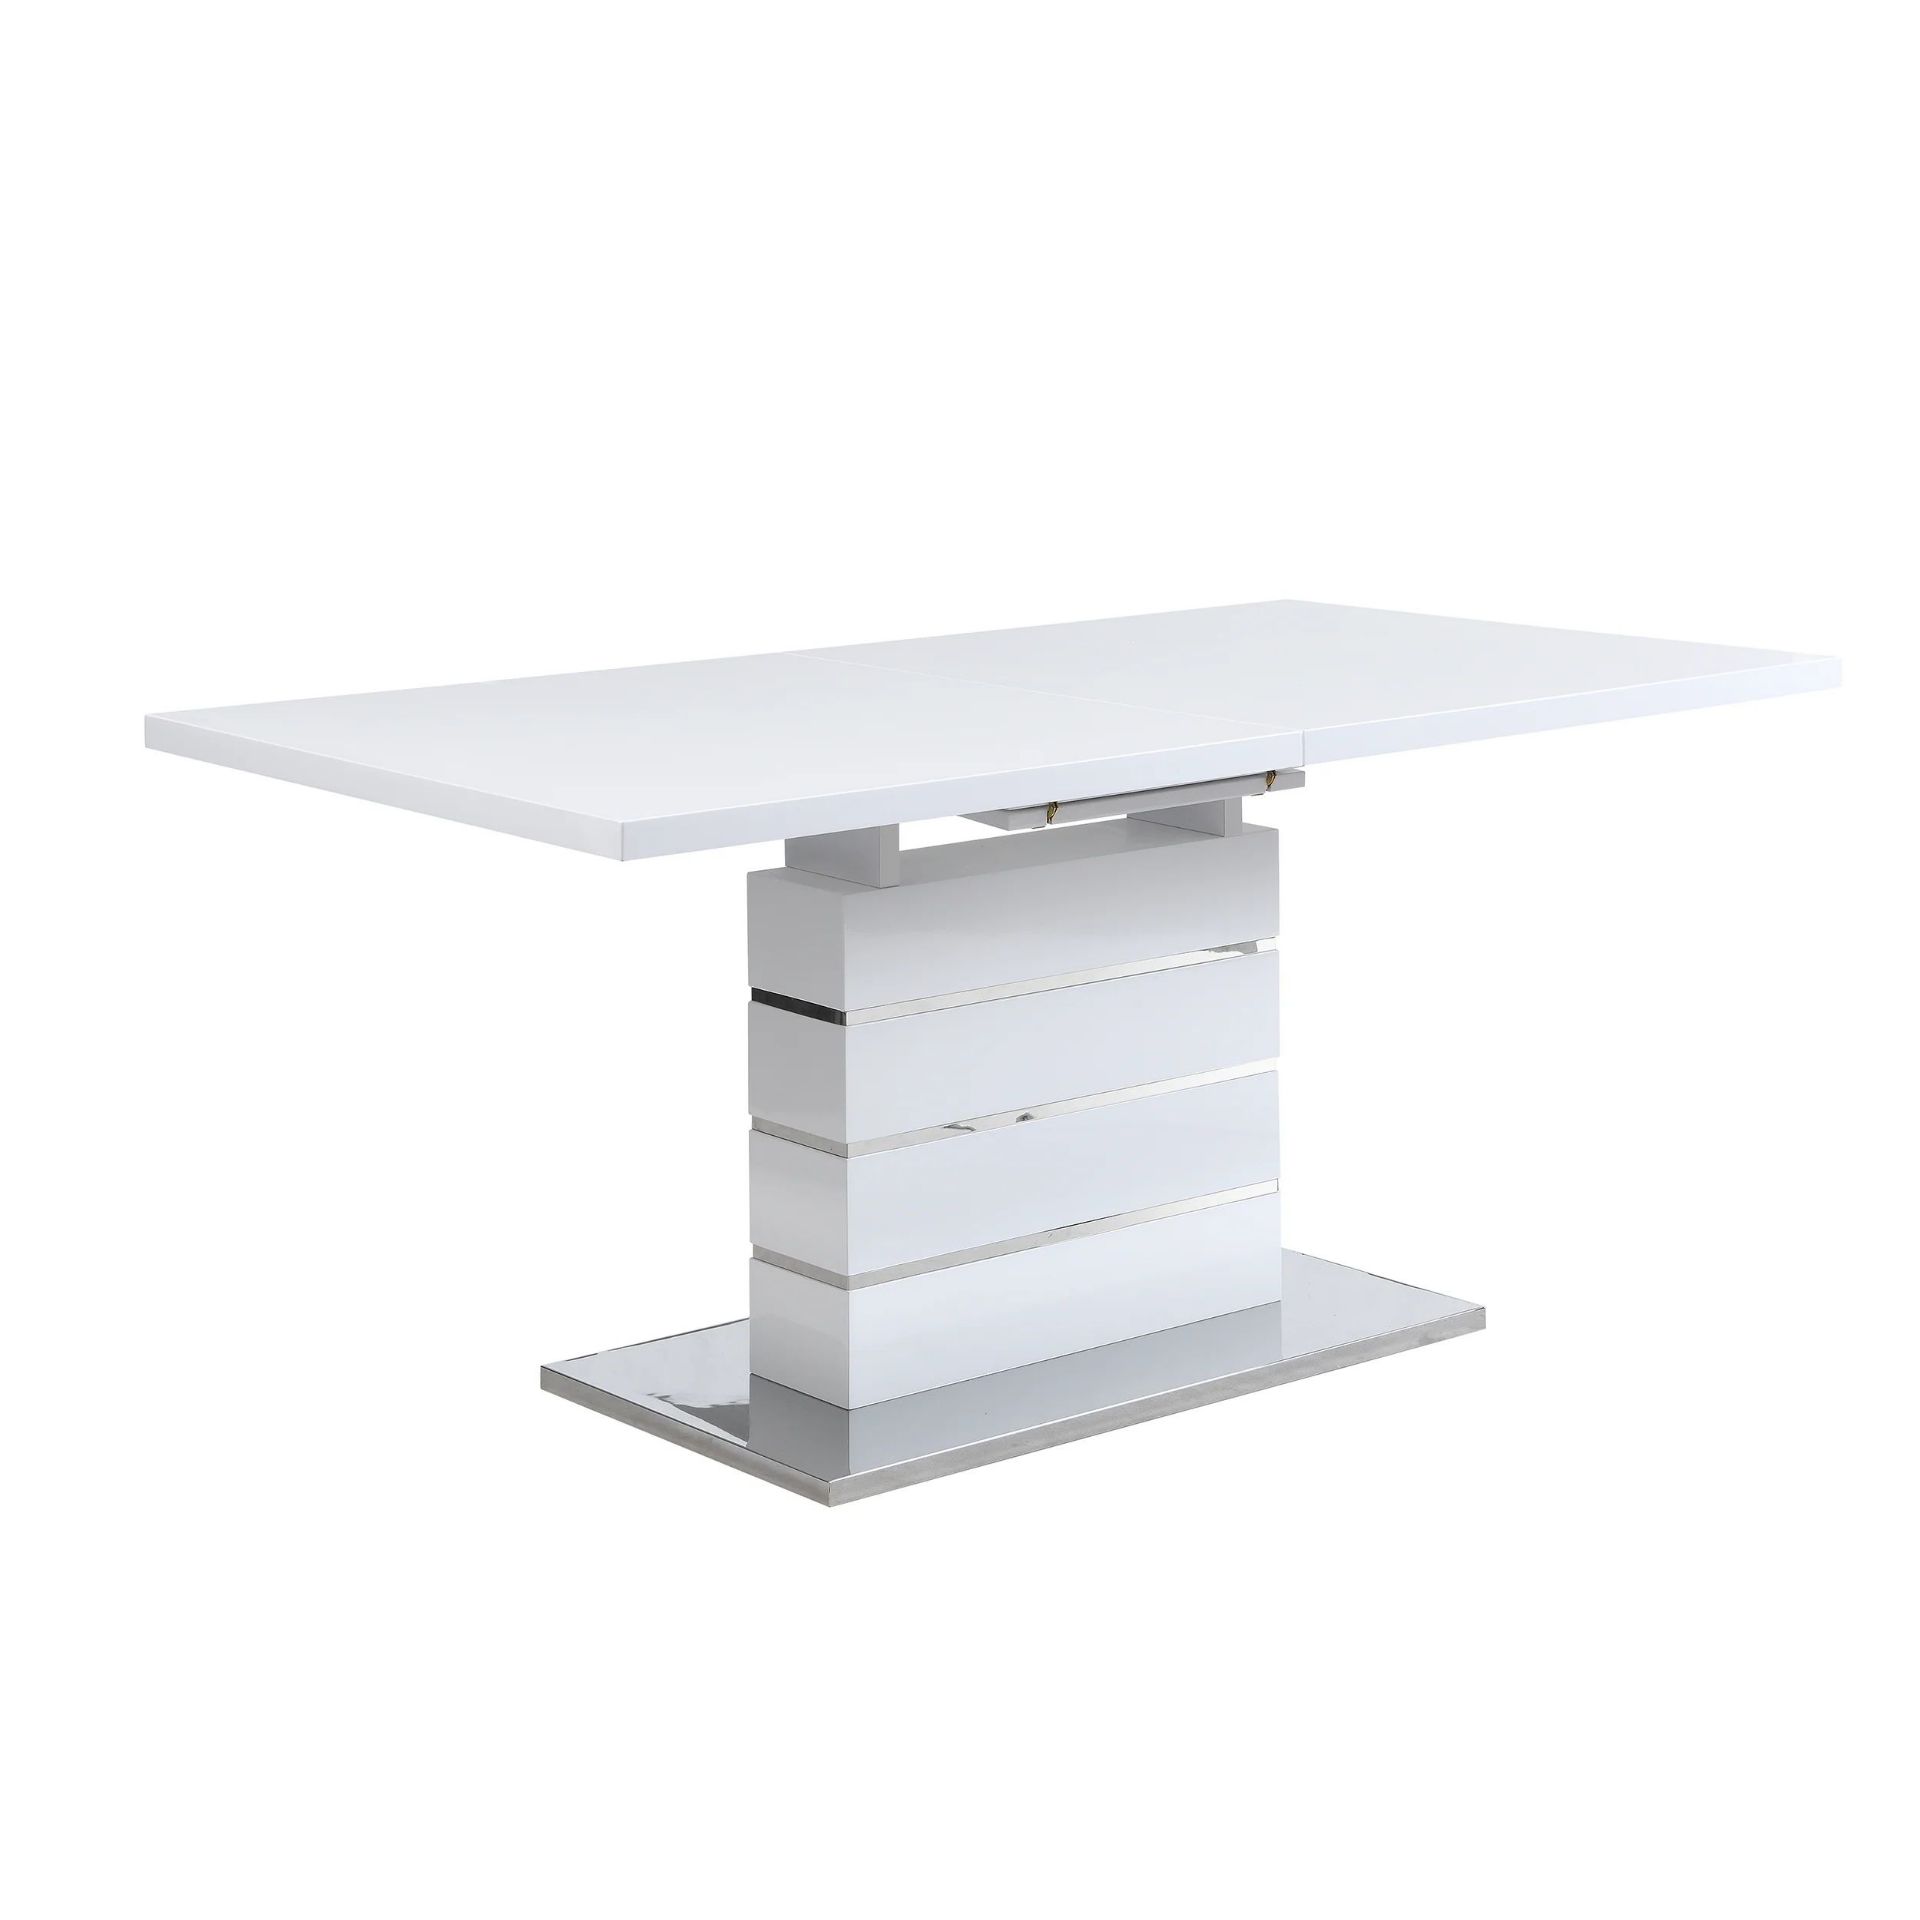 Hayne High Gloss White Extending Dining Table 6 to 8 Seater. - ER25. RRP £679.99. The Hayne table is - Image 2 of 2